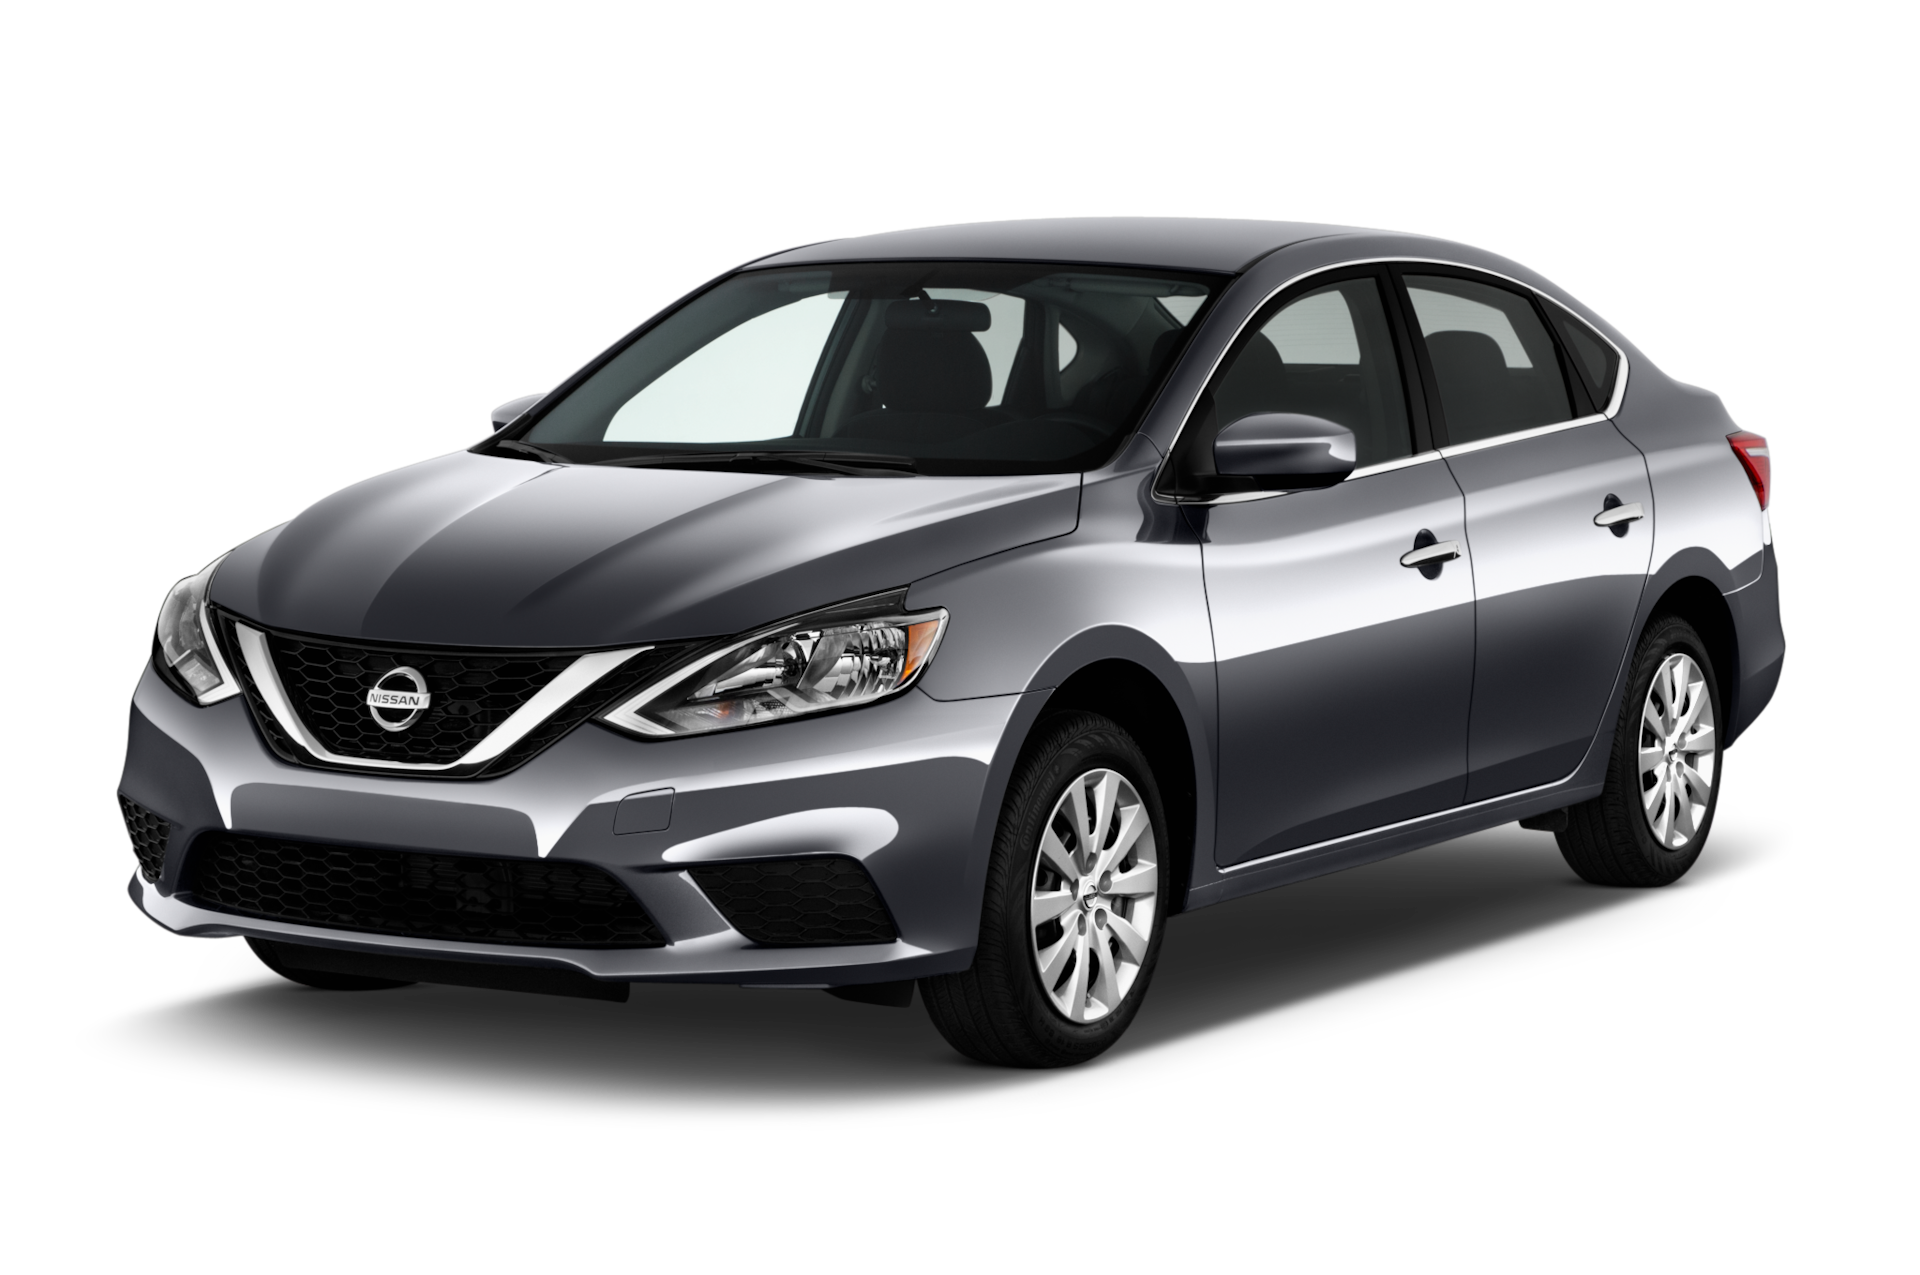 2016 Nissan Sentra Prices, Reviews, and Photos - MotorTrend